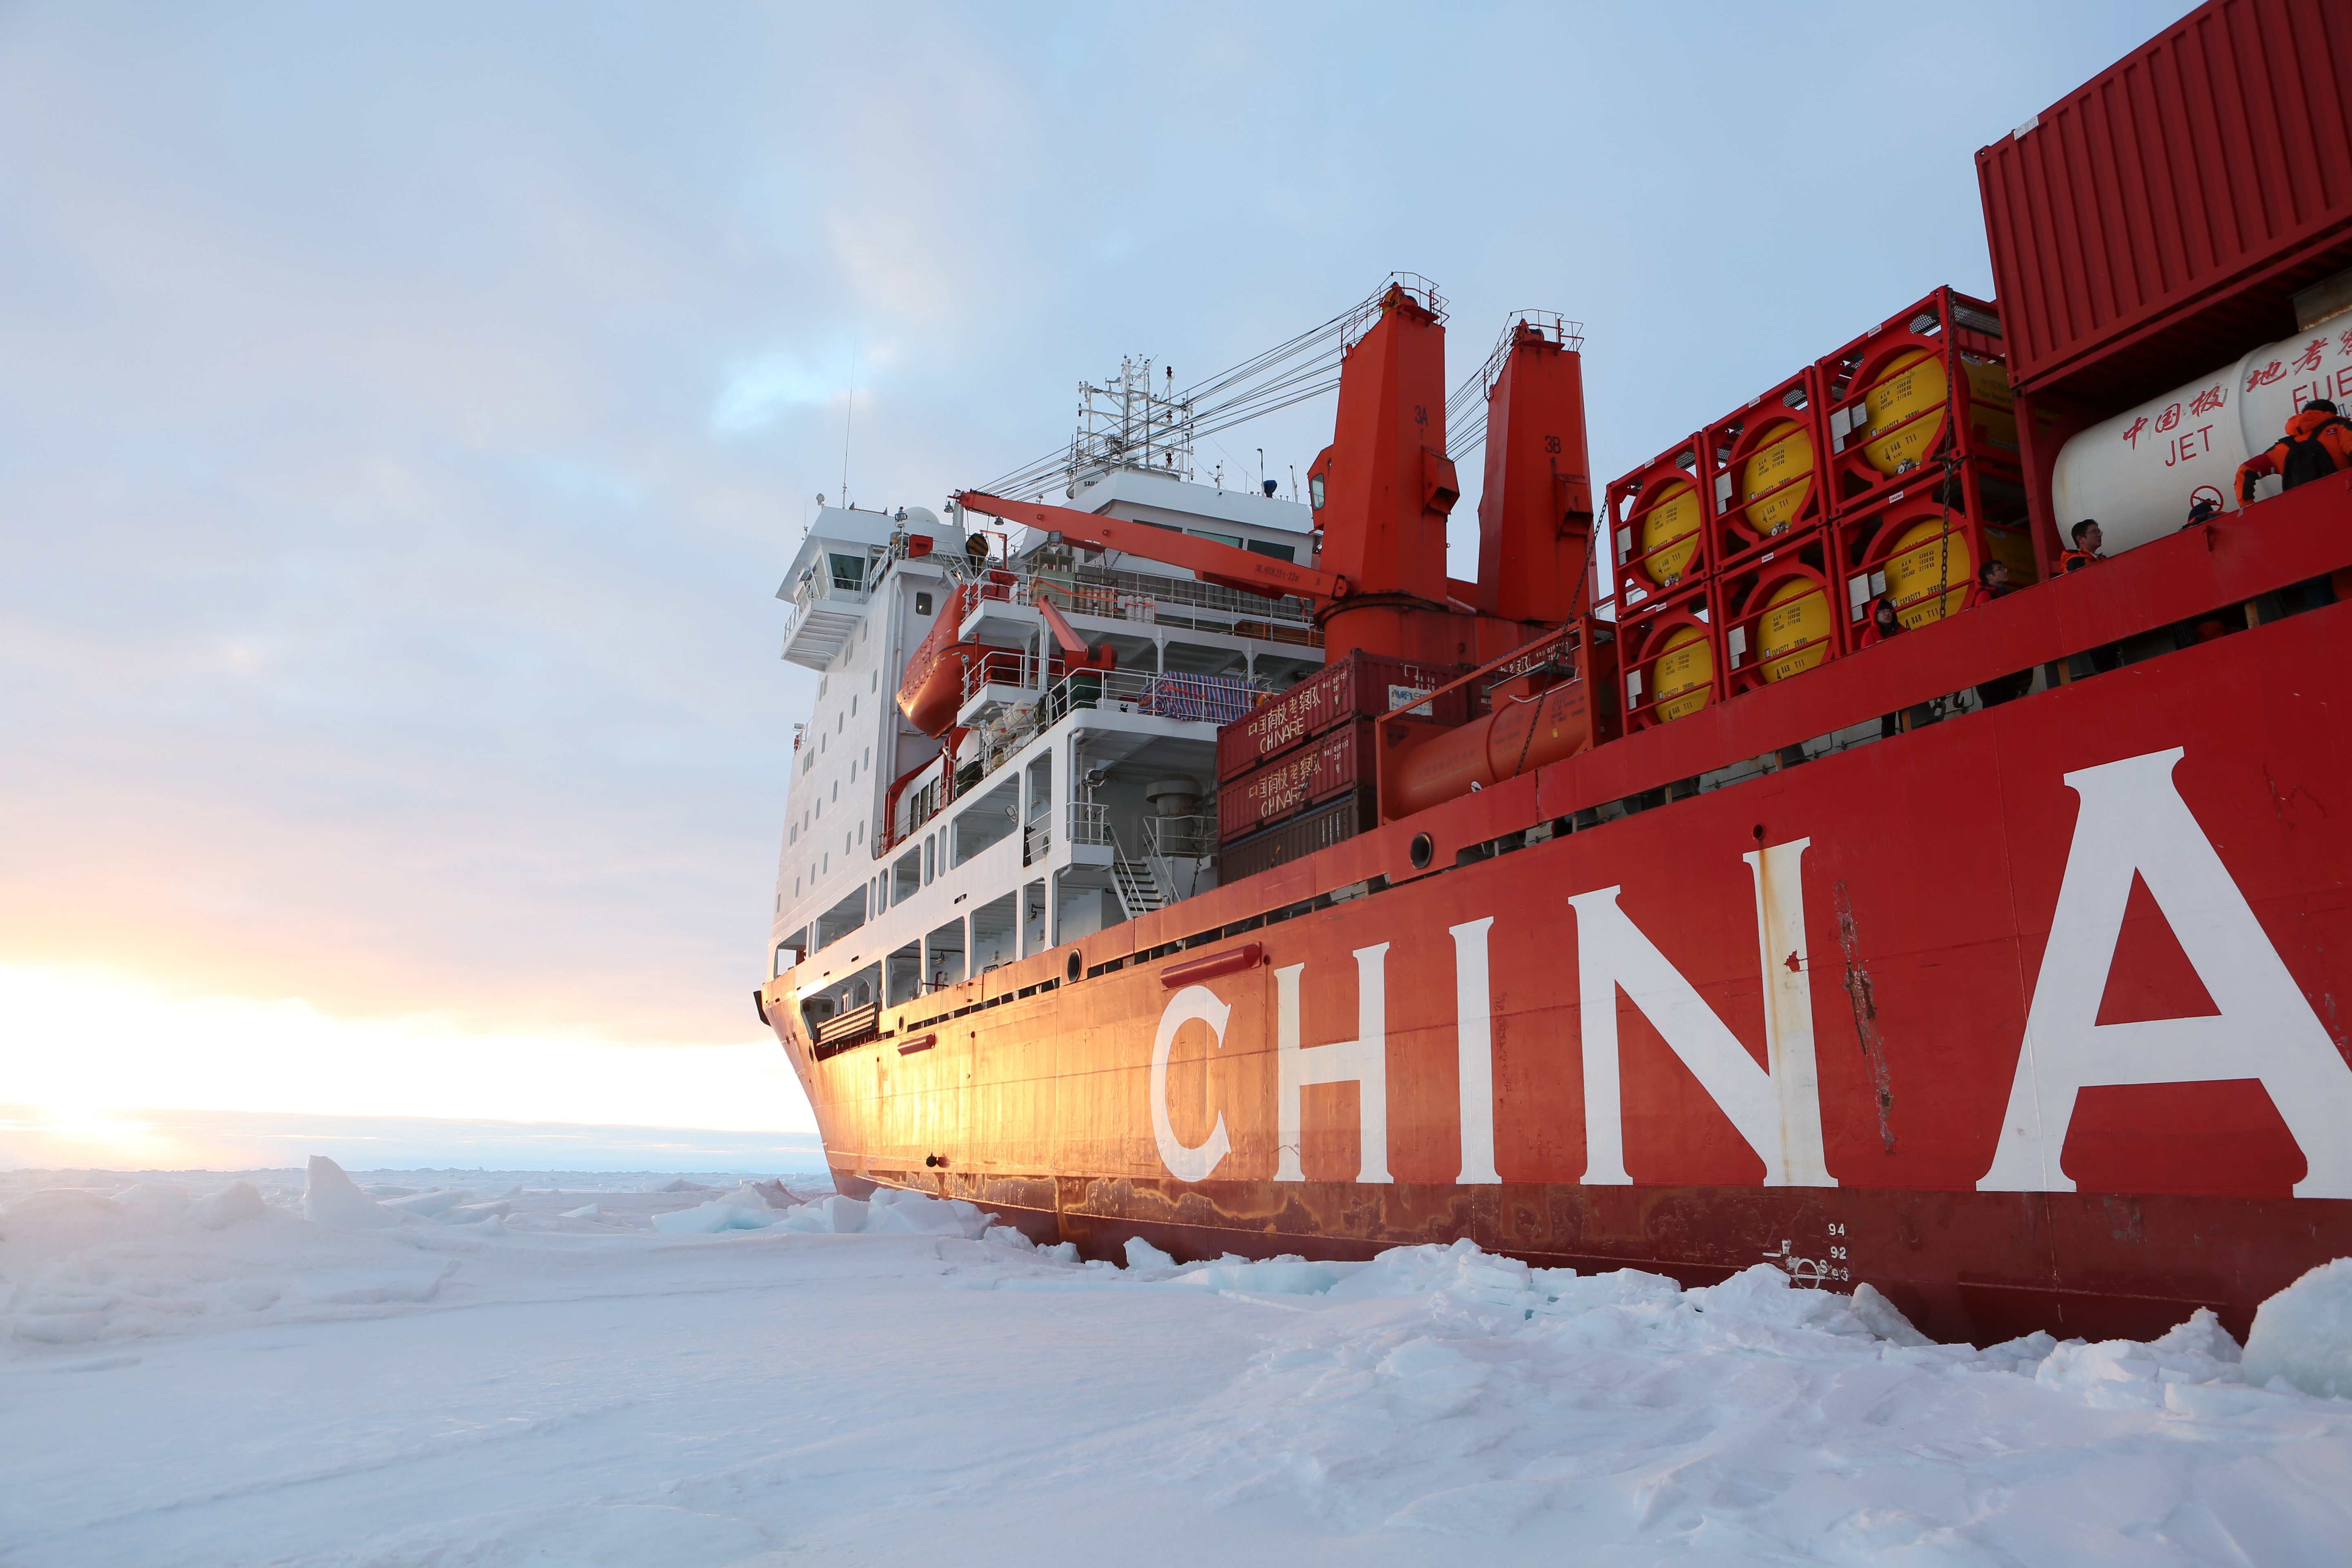 China ramps up surveillance, security threat with new satellite support from Antarctica